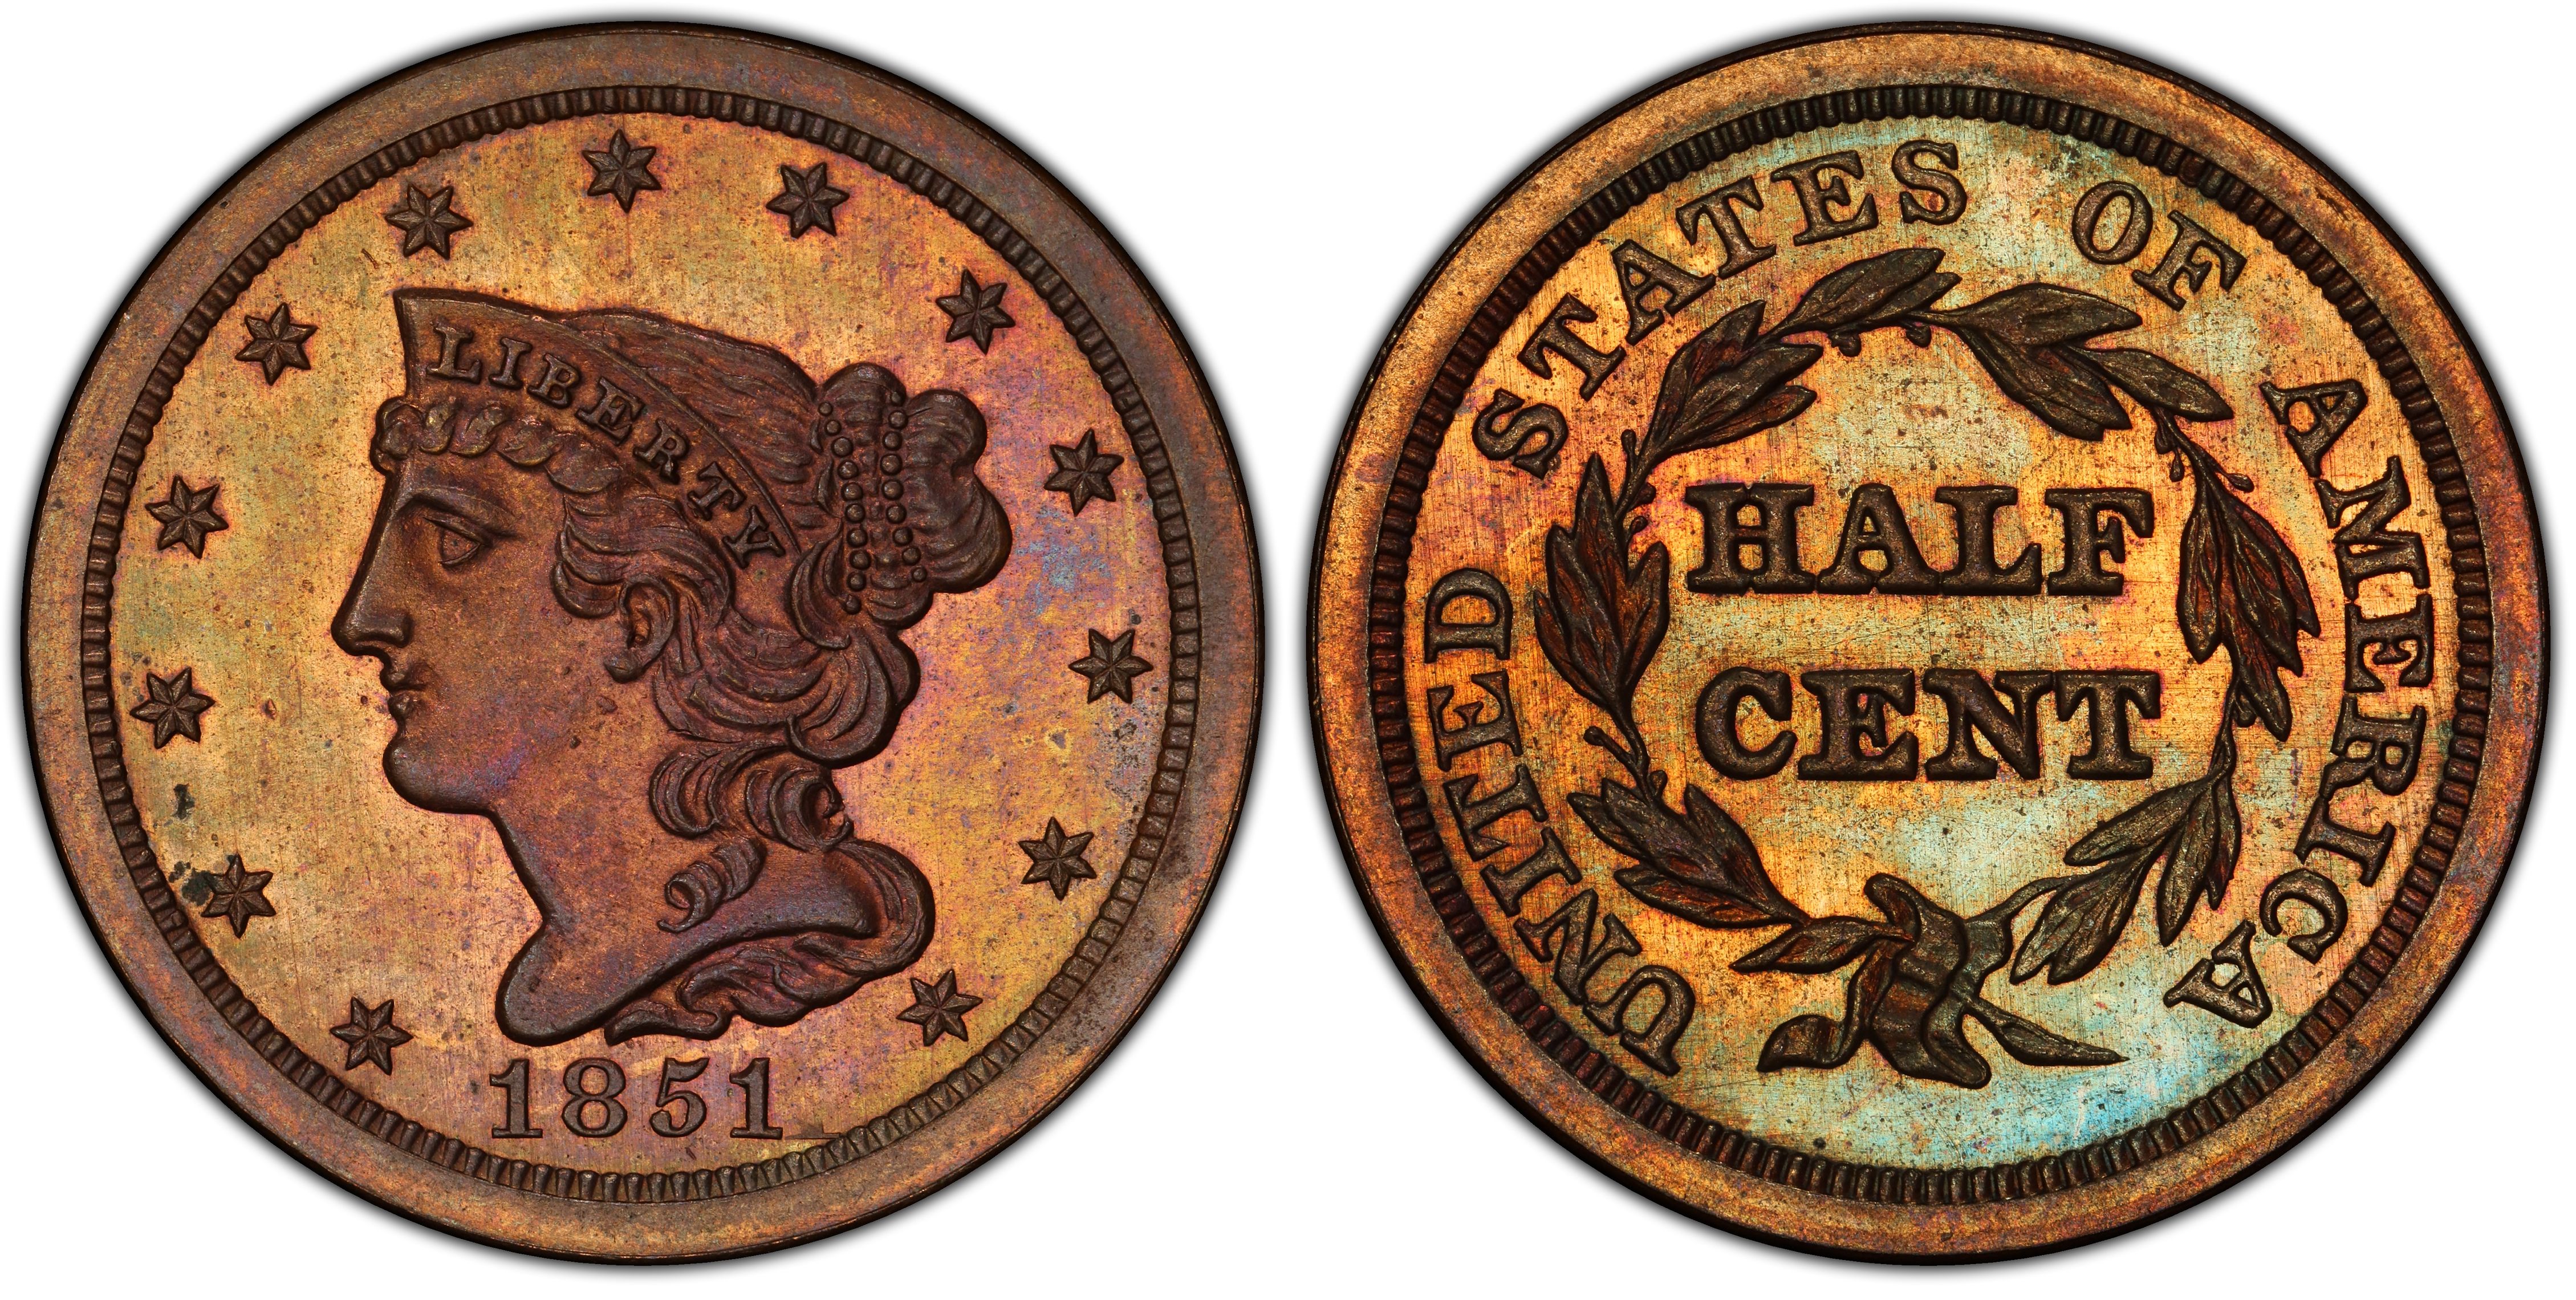 https://images.pcgs.com/CoinFacts/46004288_232179821_2200.jpg